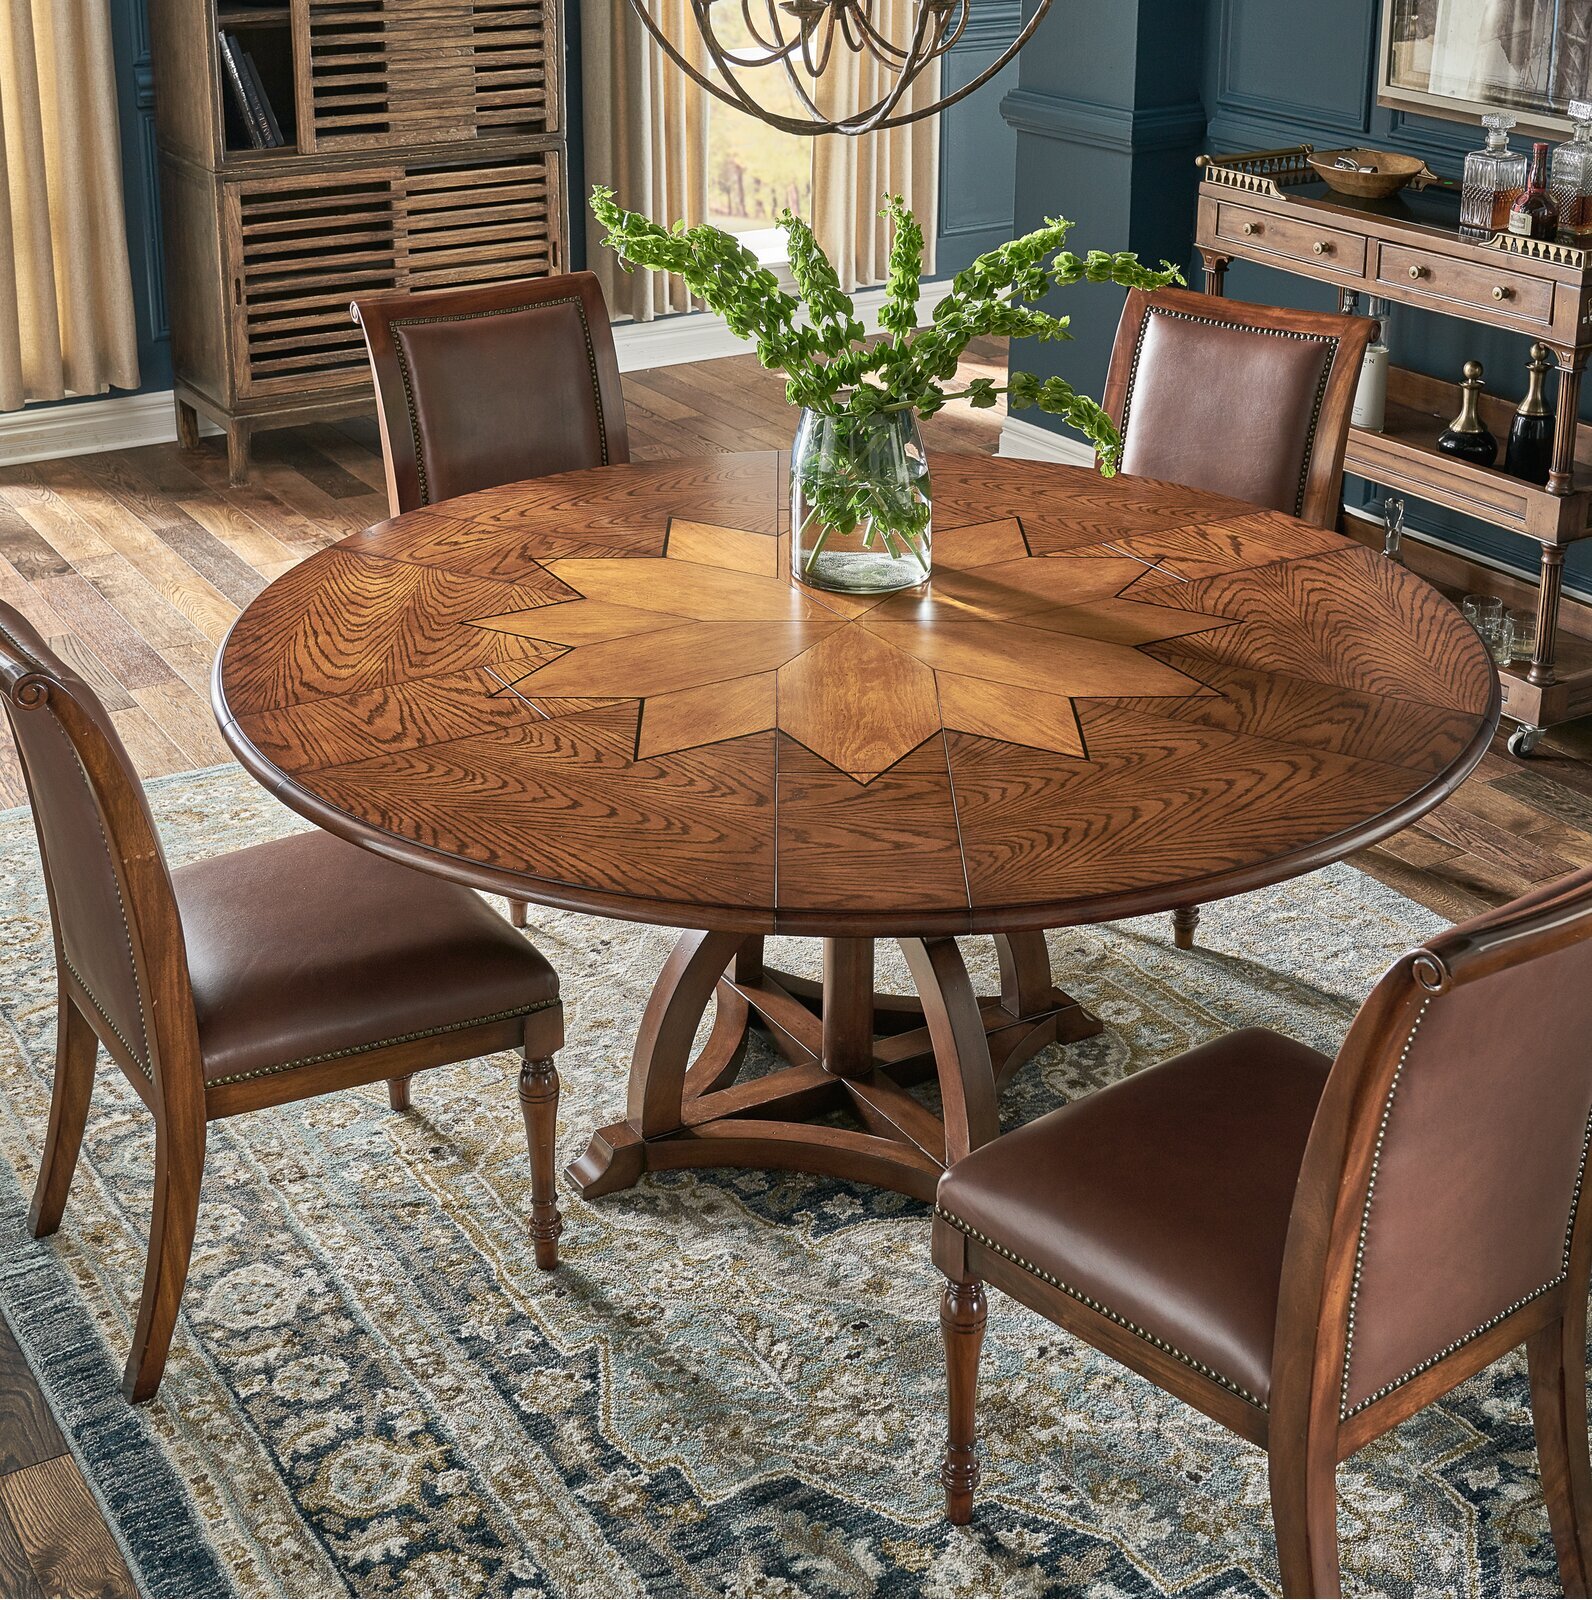 Solid wood round extendable dining table seats 8